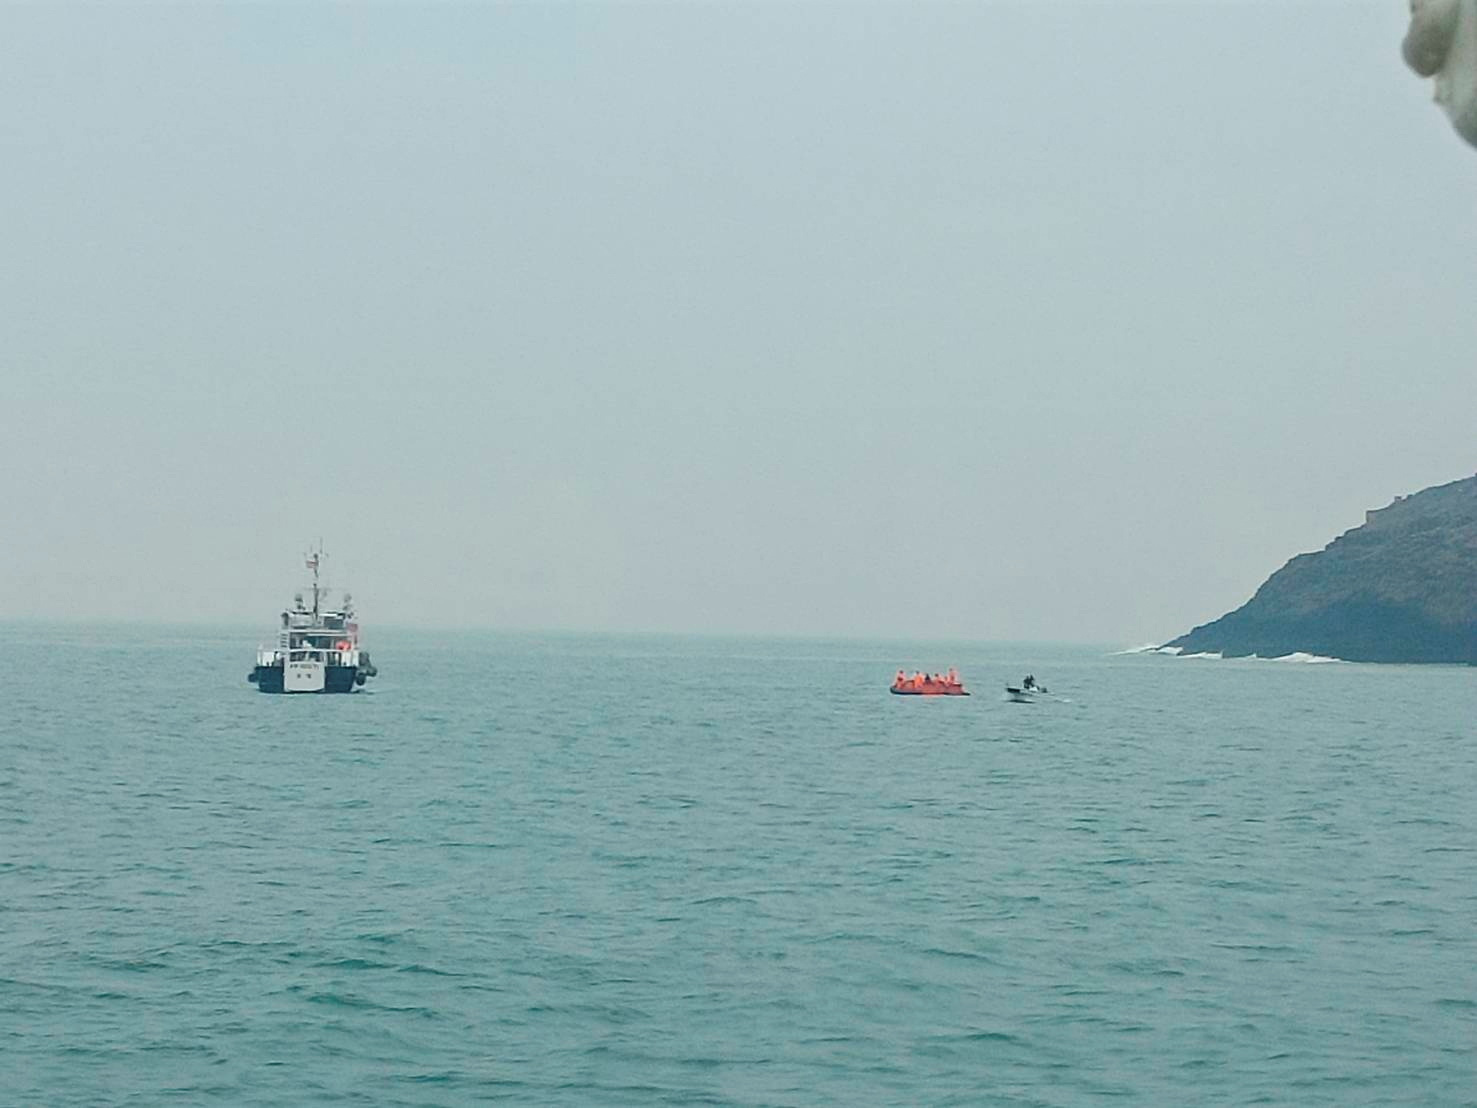 Taiwan's coast guard works during a rescue operation after a Chinese fishing boat capsized near Taiwan-controlled Kinmen islands